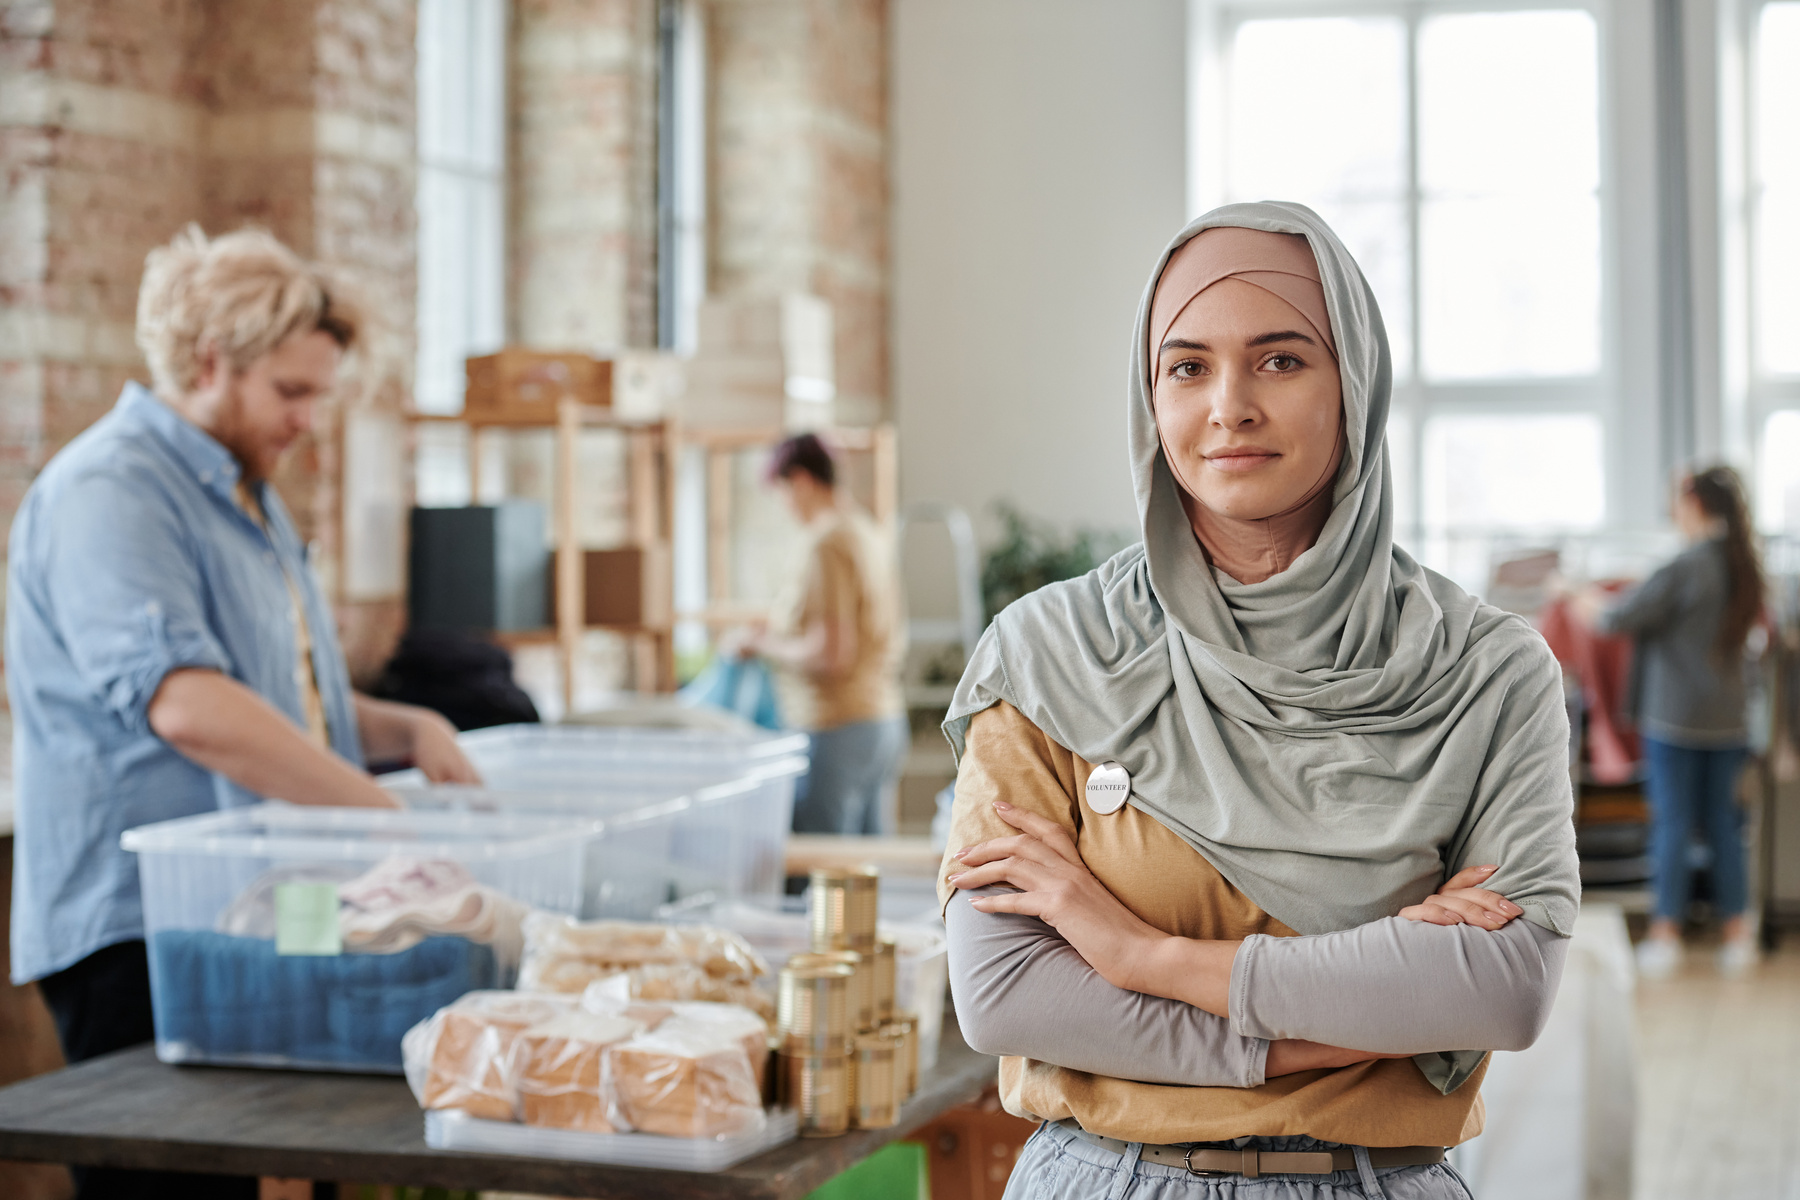 Selective Focus Photo of a Woman in a Hijab Posing with Her Arms Crossed